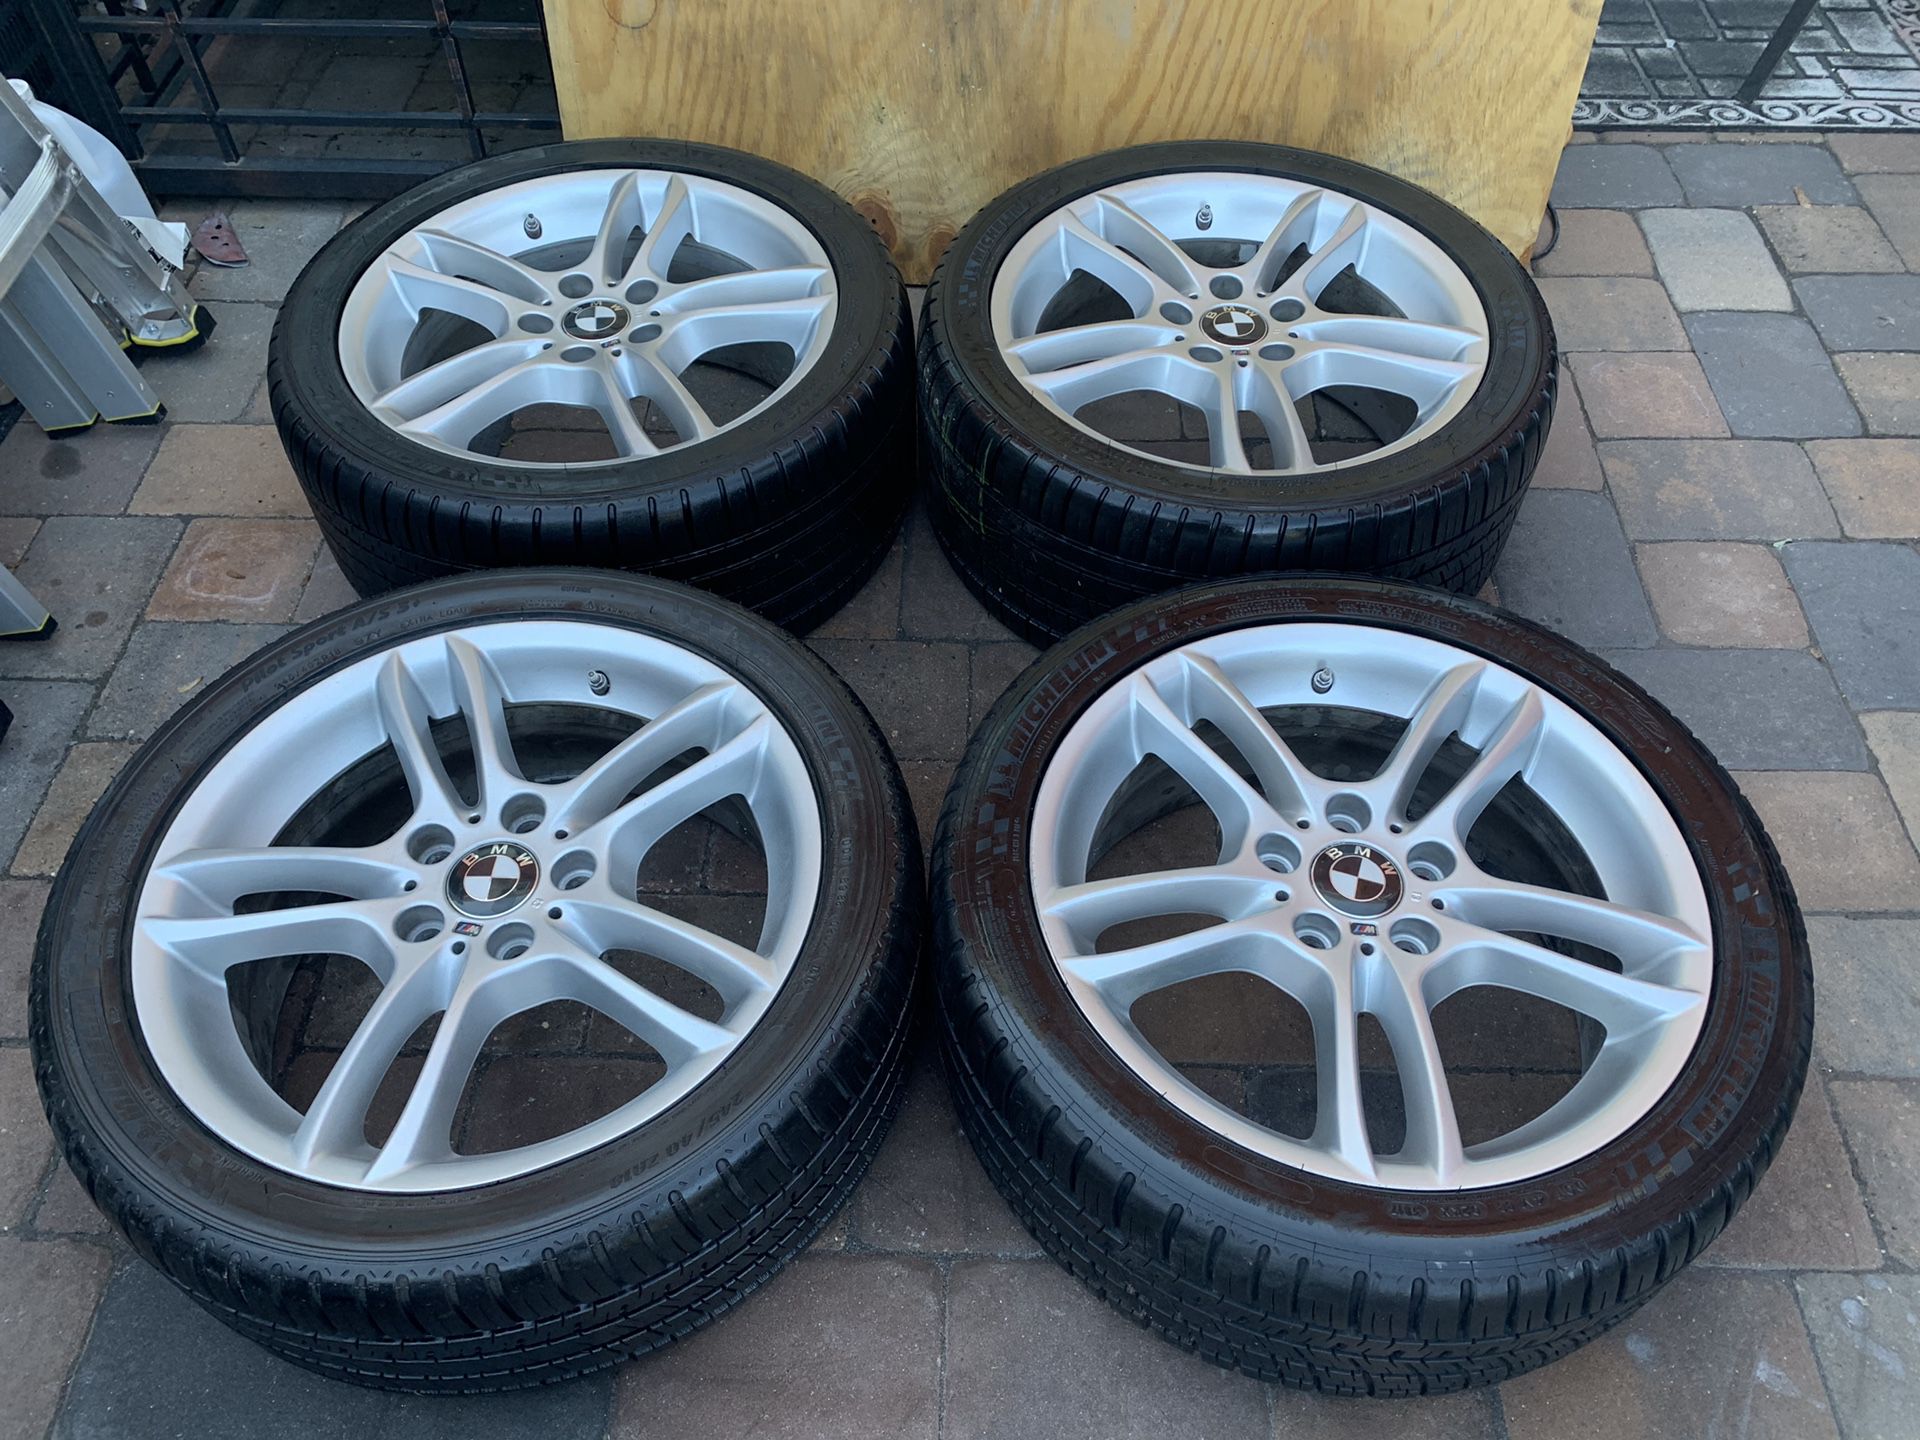 Bmw rims M staggered size 18